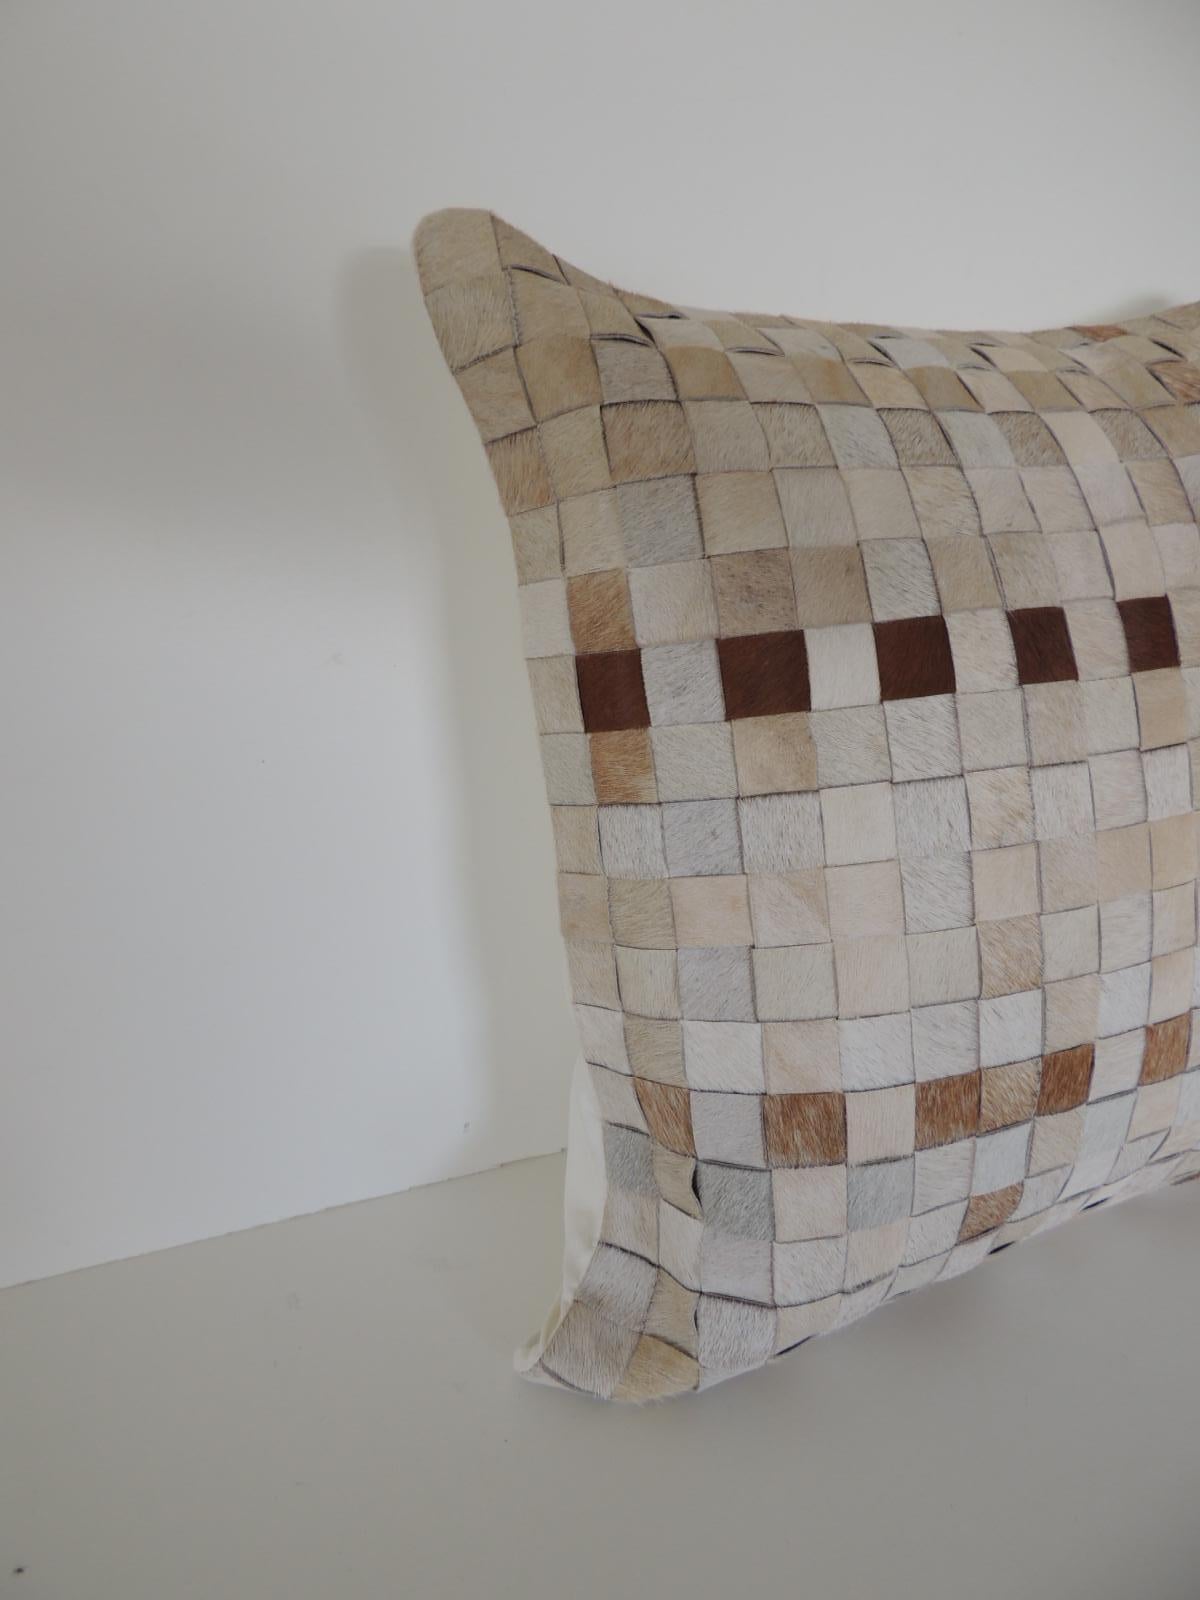 Tan and brown cowhide basket weave decorative pillow.
Natural color cotton backing, zipper closure.
Soft poly filled inserts.
Size: 18 x 18 x 6.